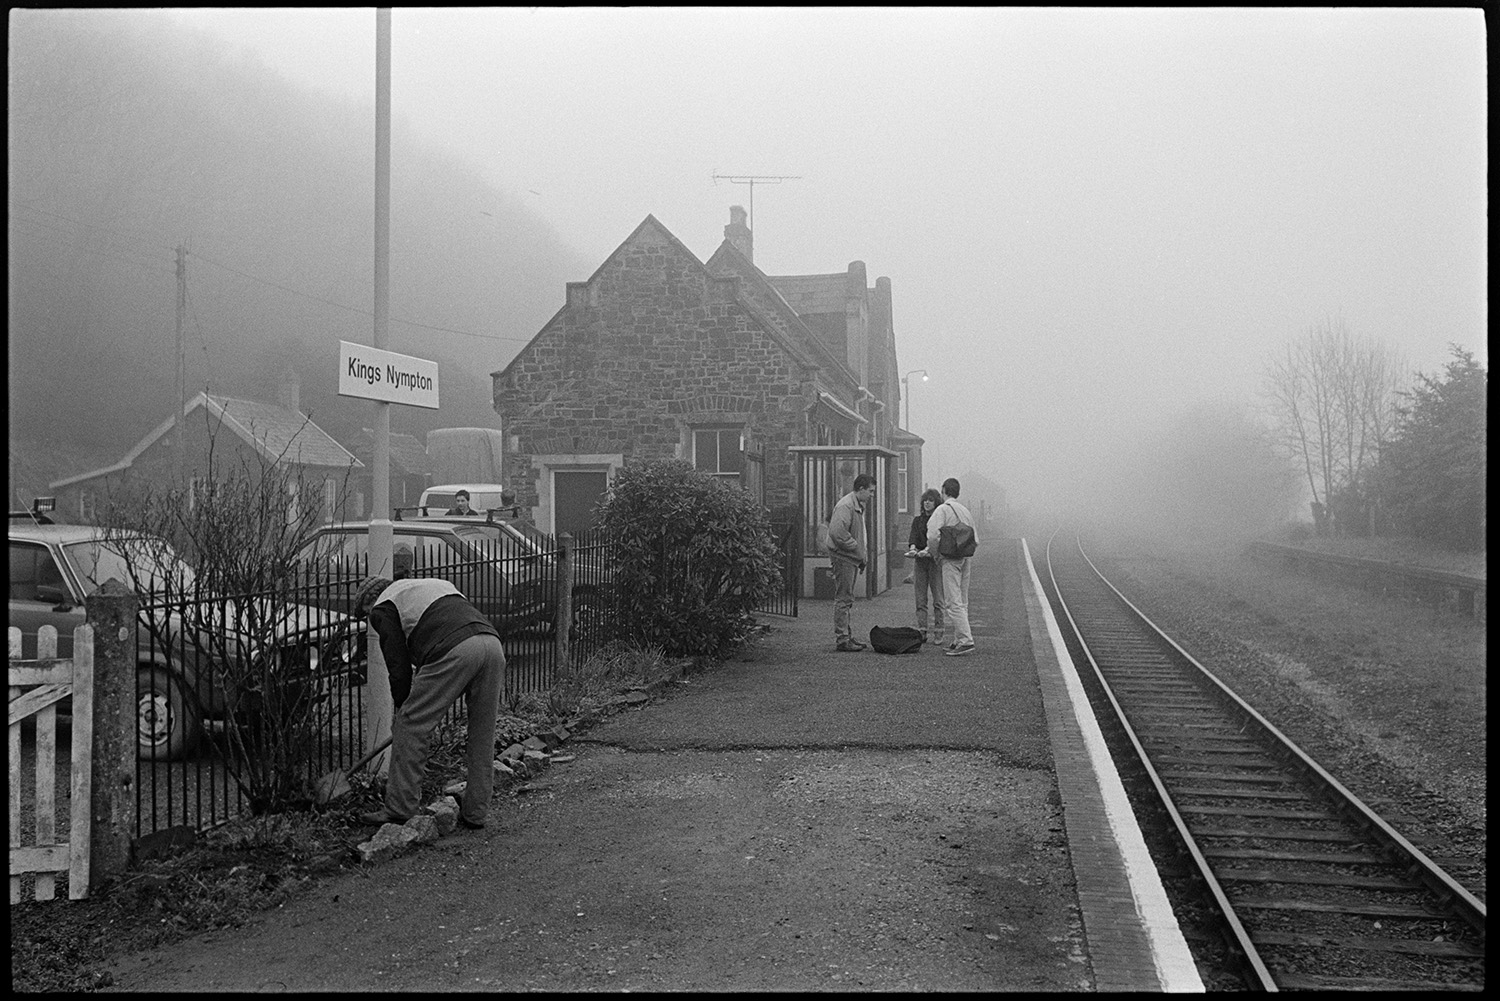 Railway station, platform with train and passengers. 
[Passengers waiting on the platform at Kings Nympton railway station. Parked cars can be seen in the car park and the track and station building are visible.]